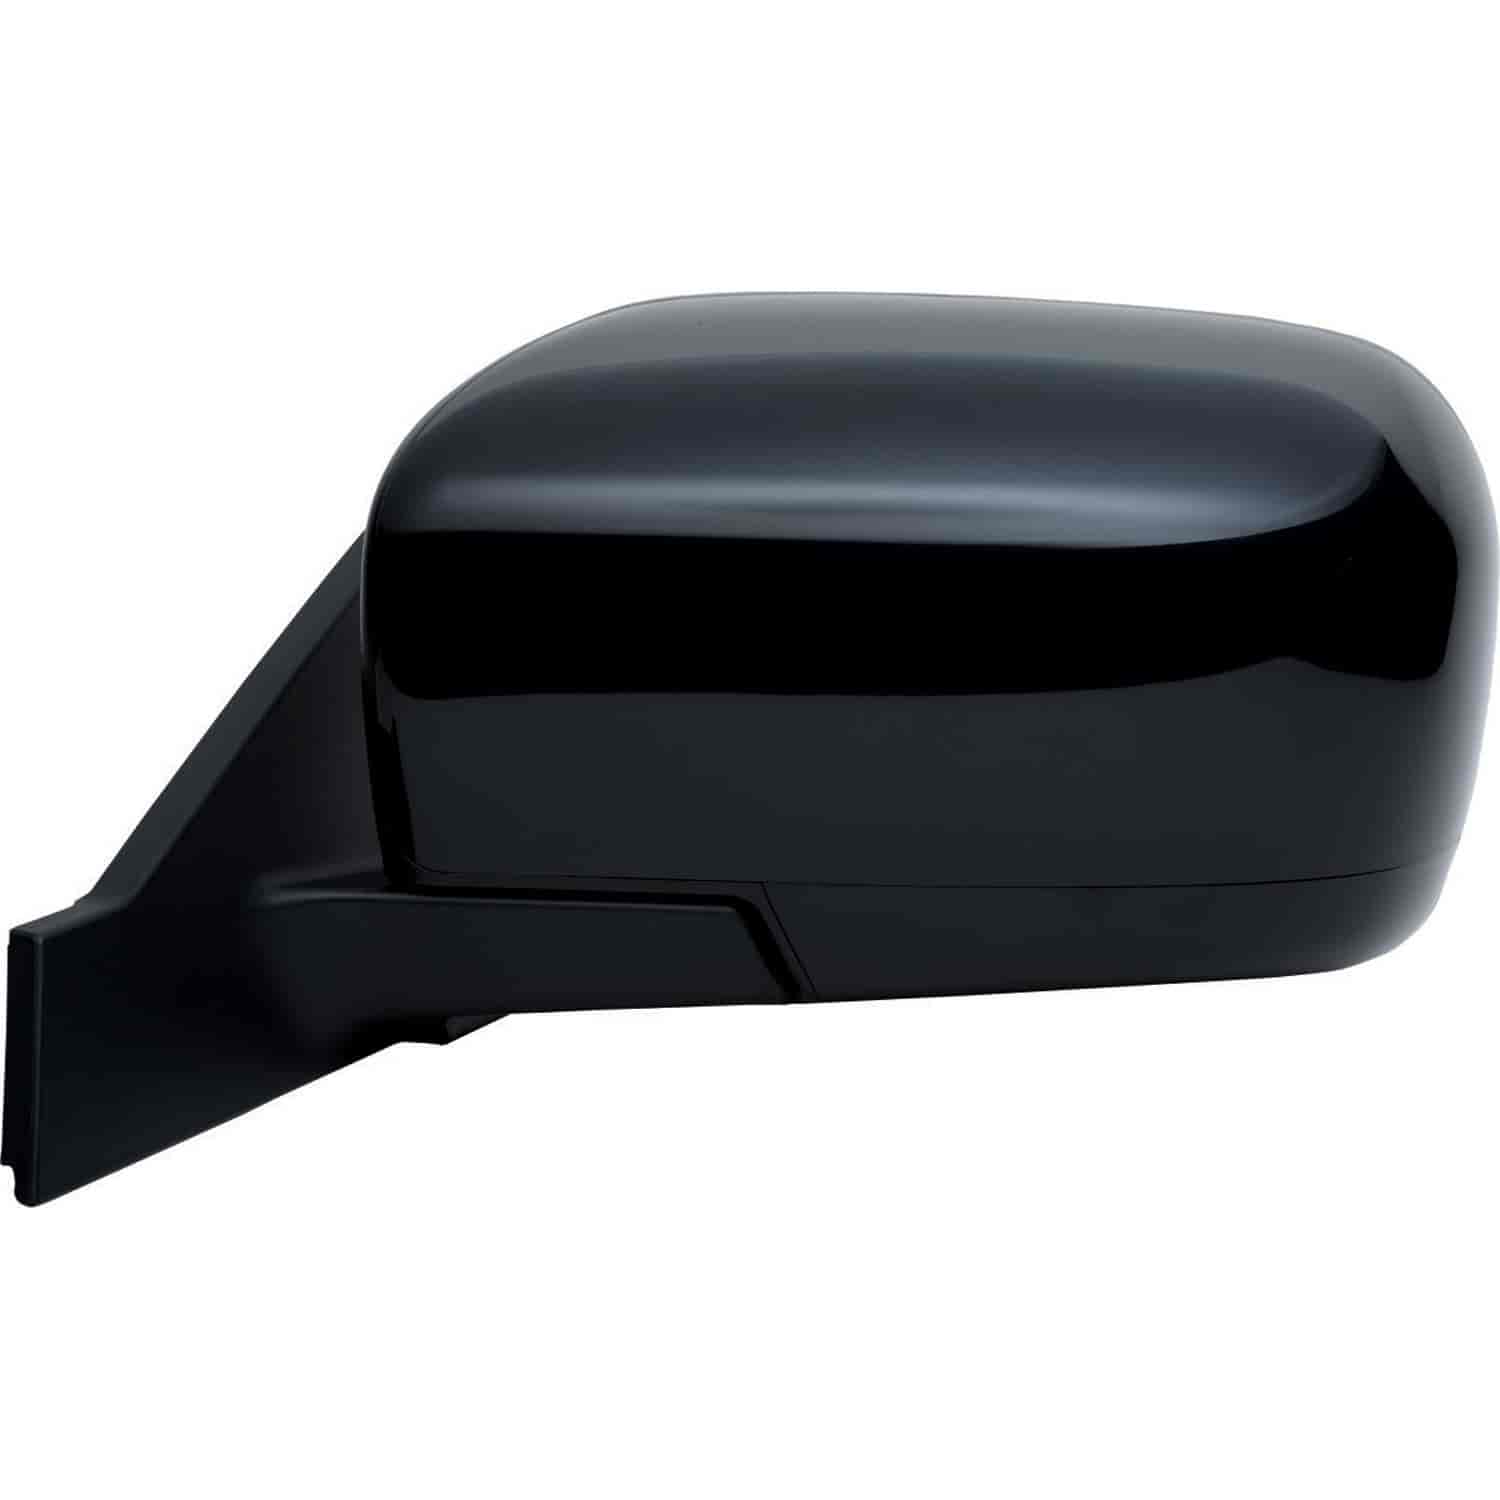 OEM Style Replacement mirror for 06-09 Mazda 5 driver side mirror tested to fit and function like th